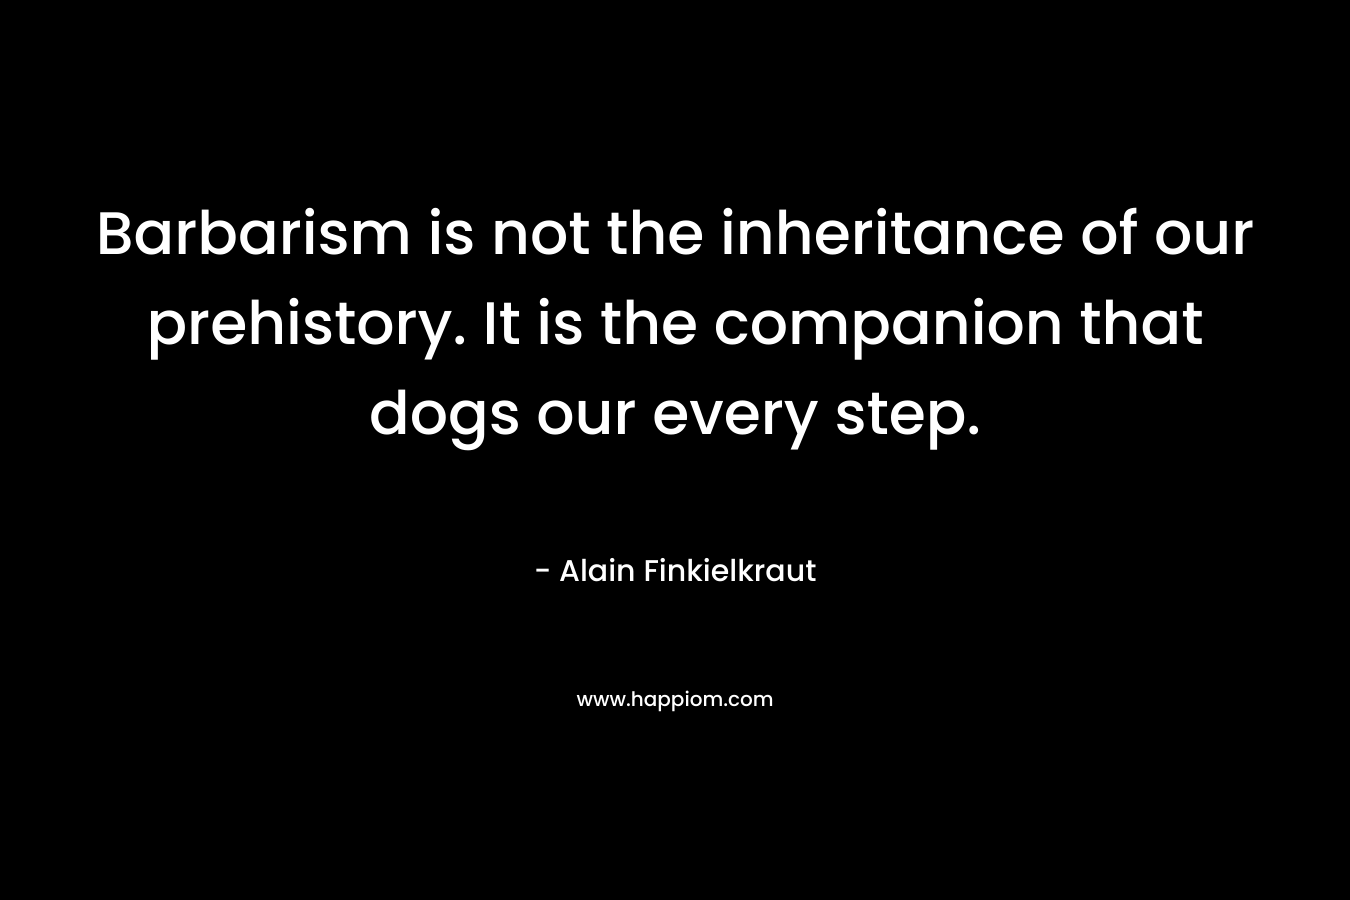 Barbarism is not the inheritance of our prehistory. It is the companion that dogs our every step. – Alain Finkielkraut